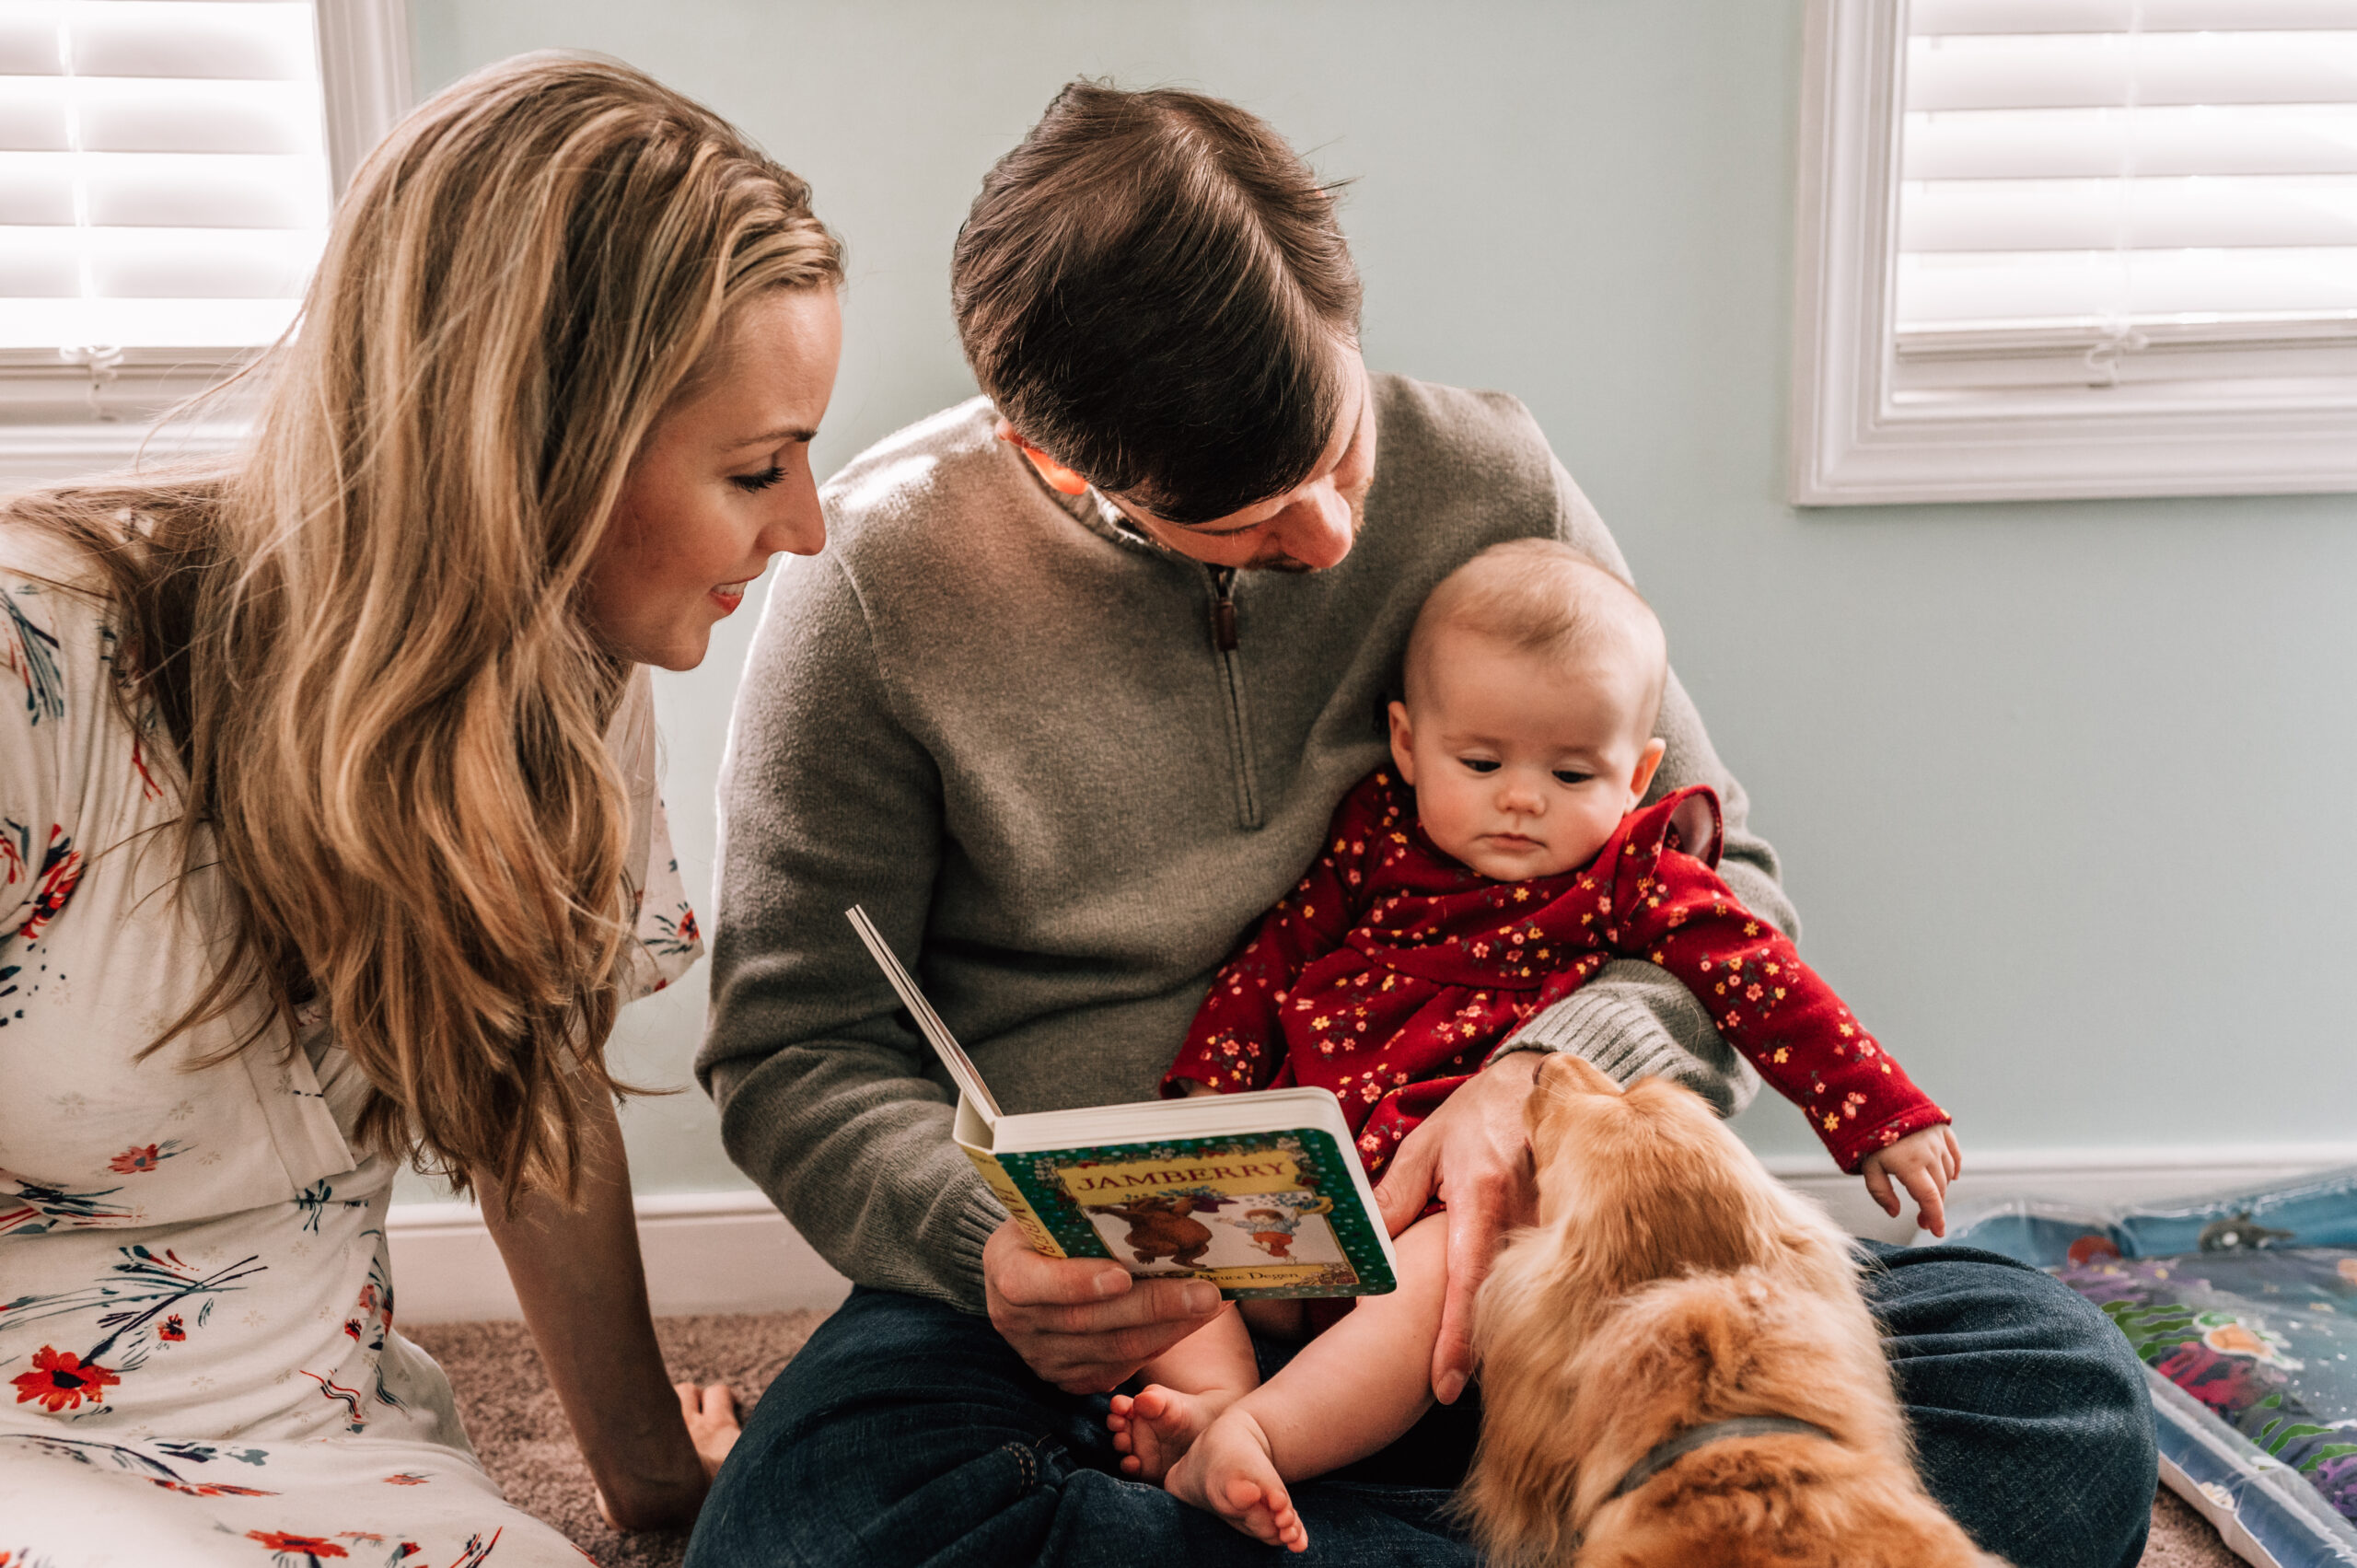 A mom and dad sit reading to their baby while the family dog checks on baby.